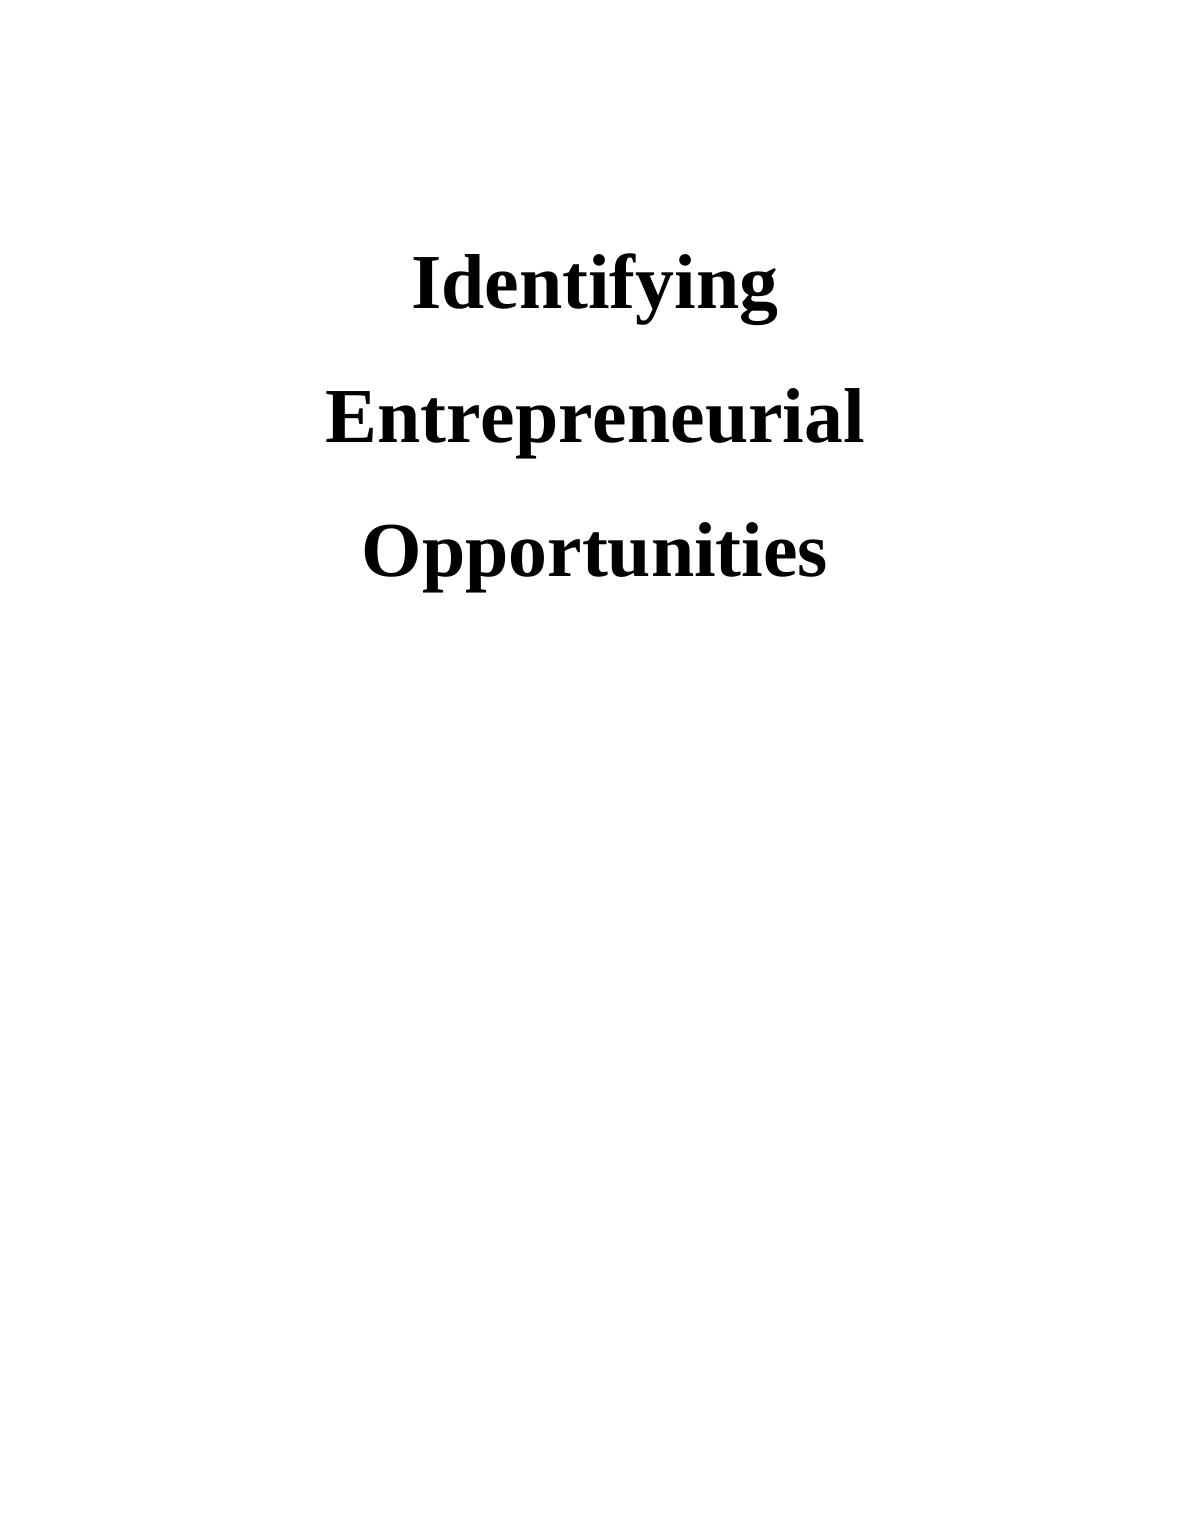 Identifying Entrepreneurial Opportunities Assignment Solved - Coffee Delight_1